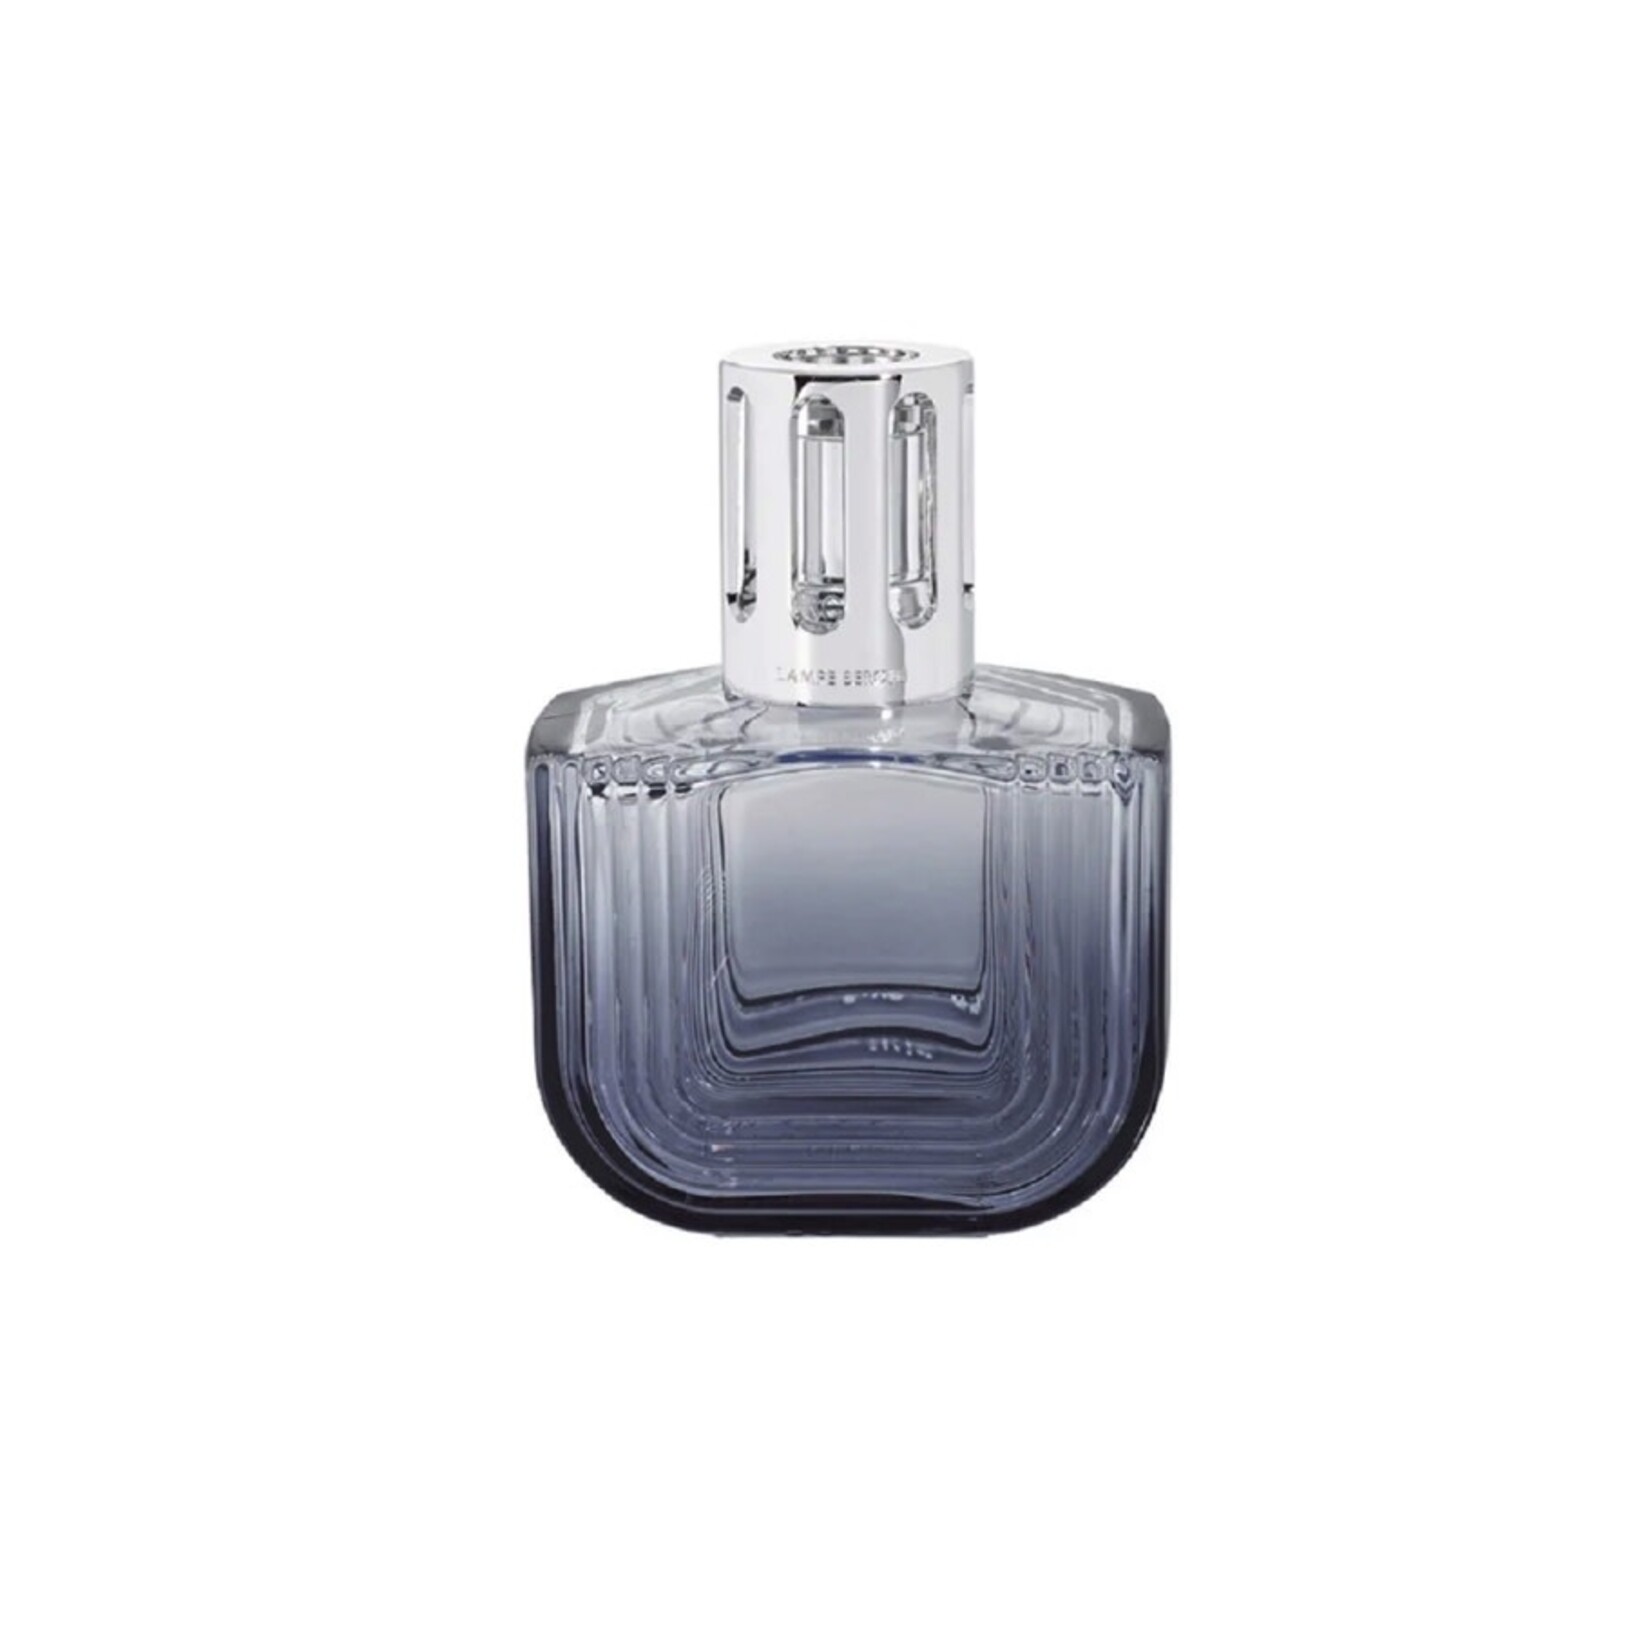 Maison Berger Paris Olympe Fragrance Lamp with Exquisite Sparkle —Grey